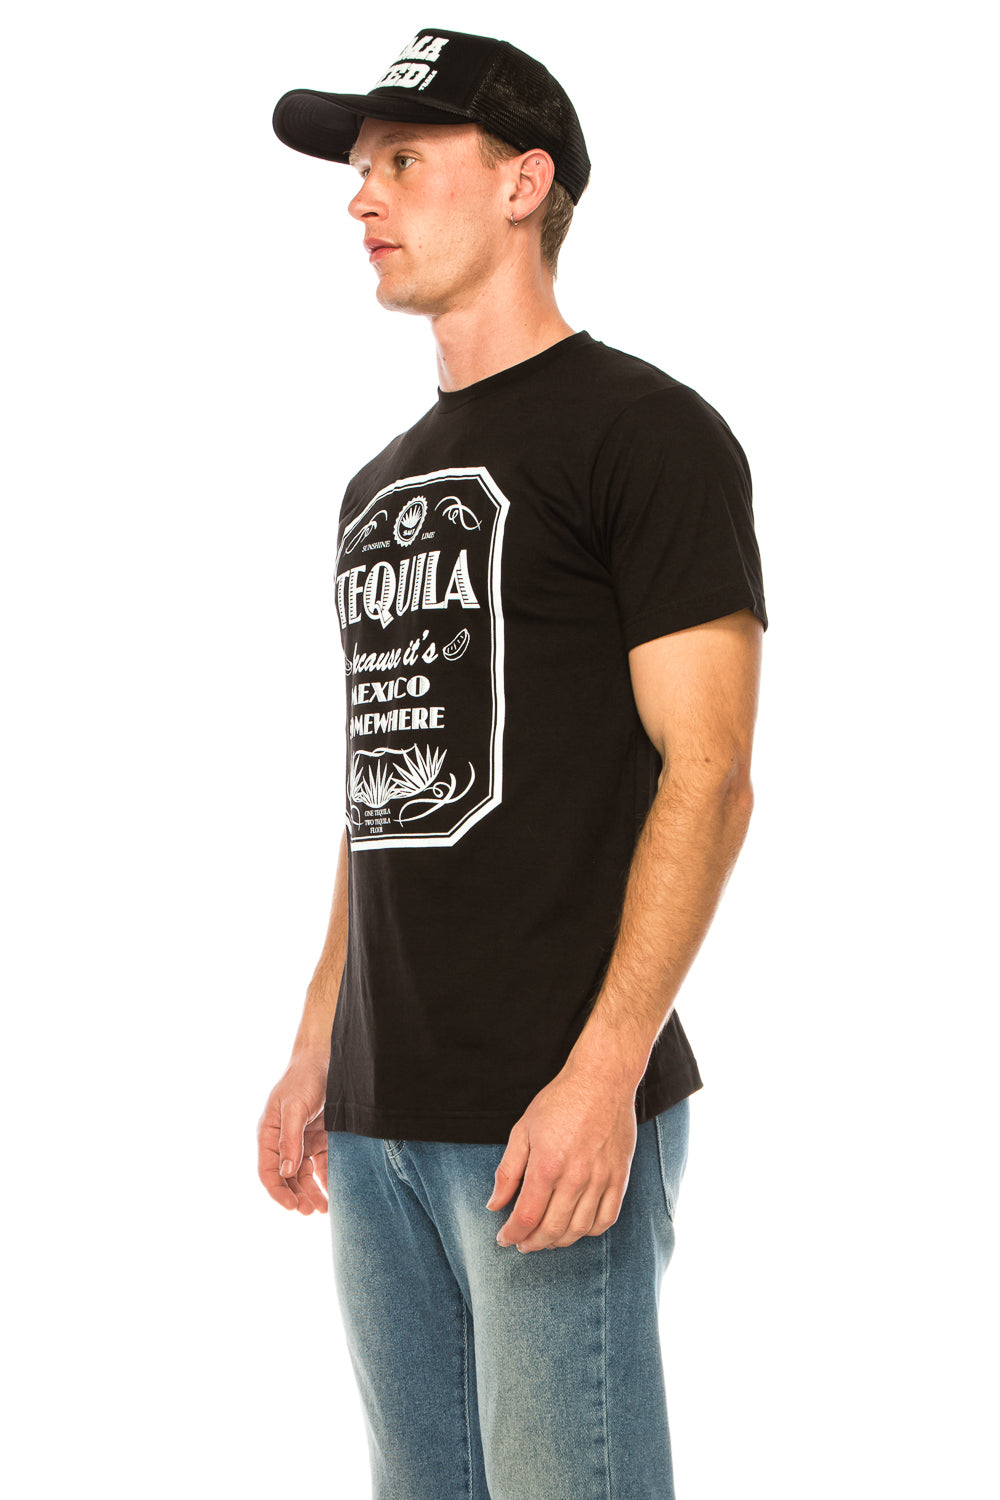 TEQUILA BECAUSE IT'S MEXICO SOMEWHERE T SHIRT - Trailsclothing.com